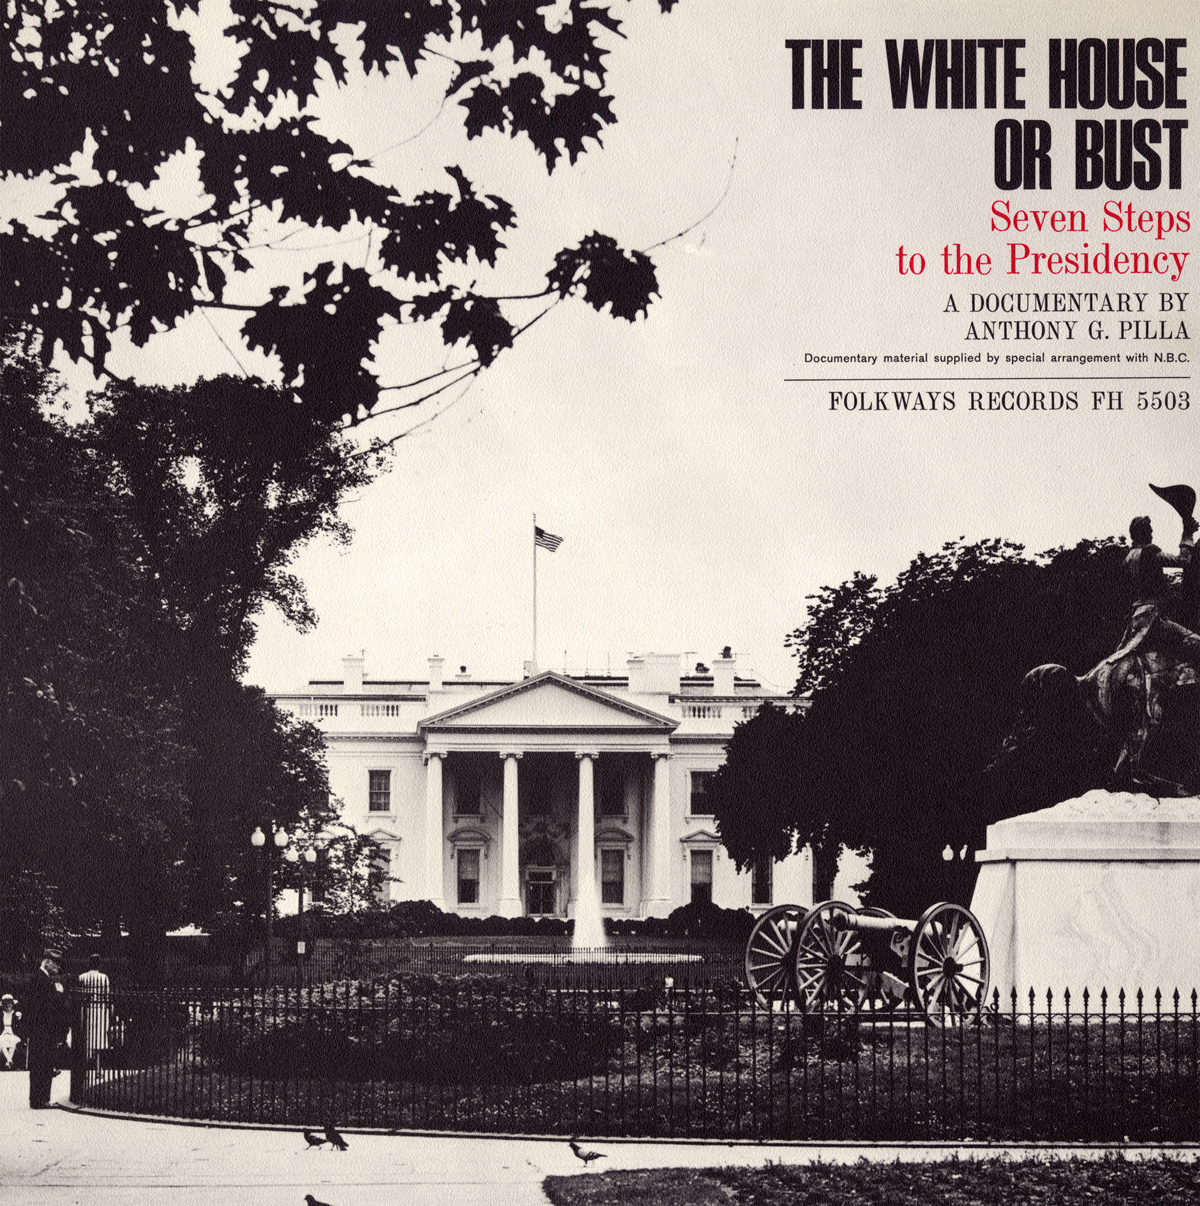 WHITE HOUSE OR BUST: SEVEN STEPS TO THE PRESIDENCY